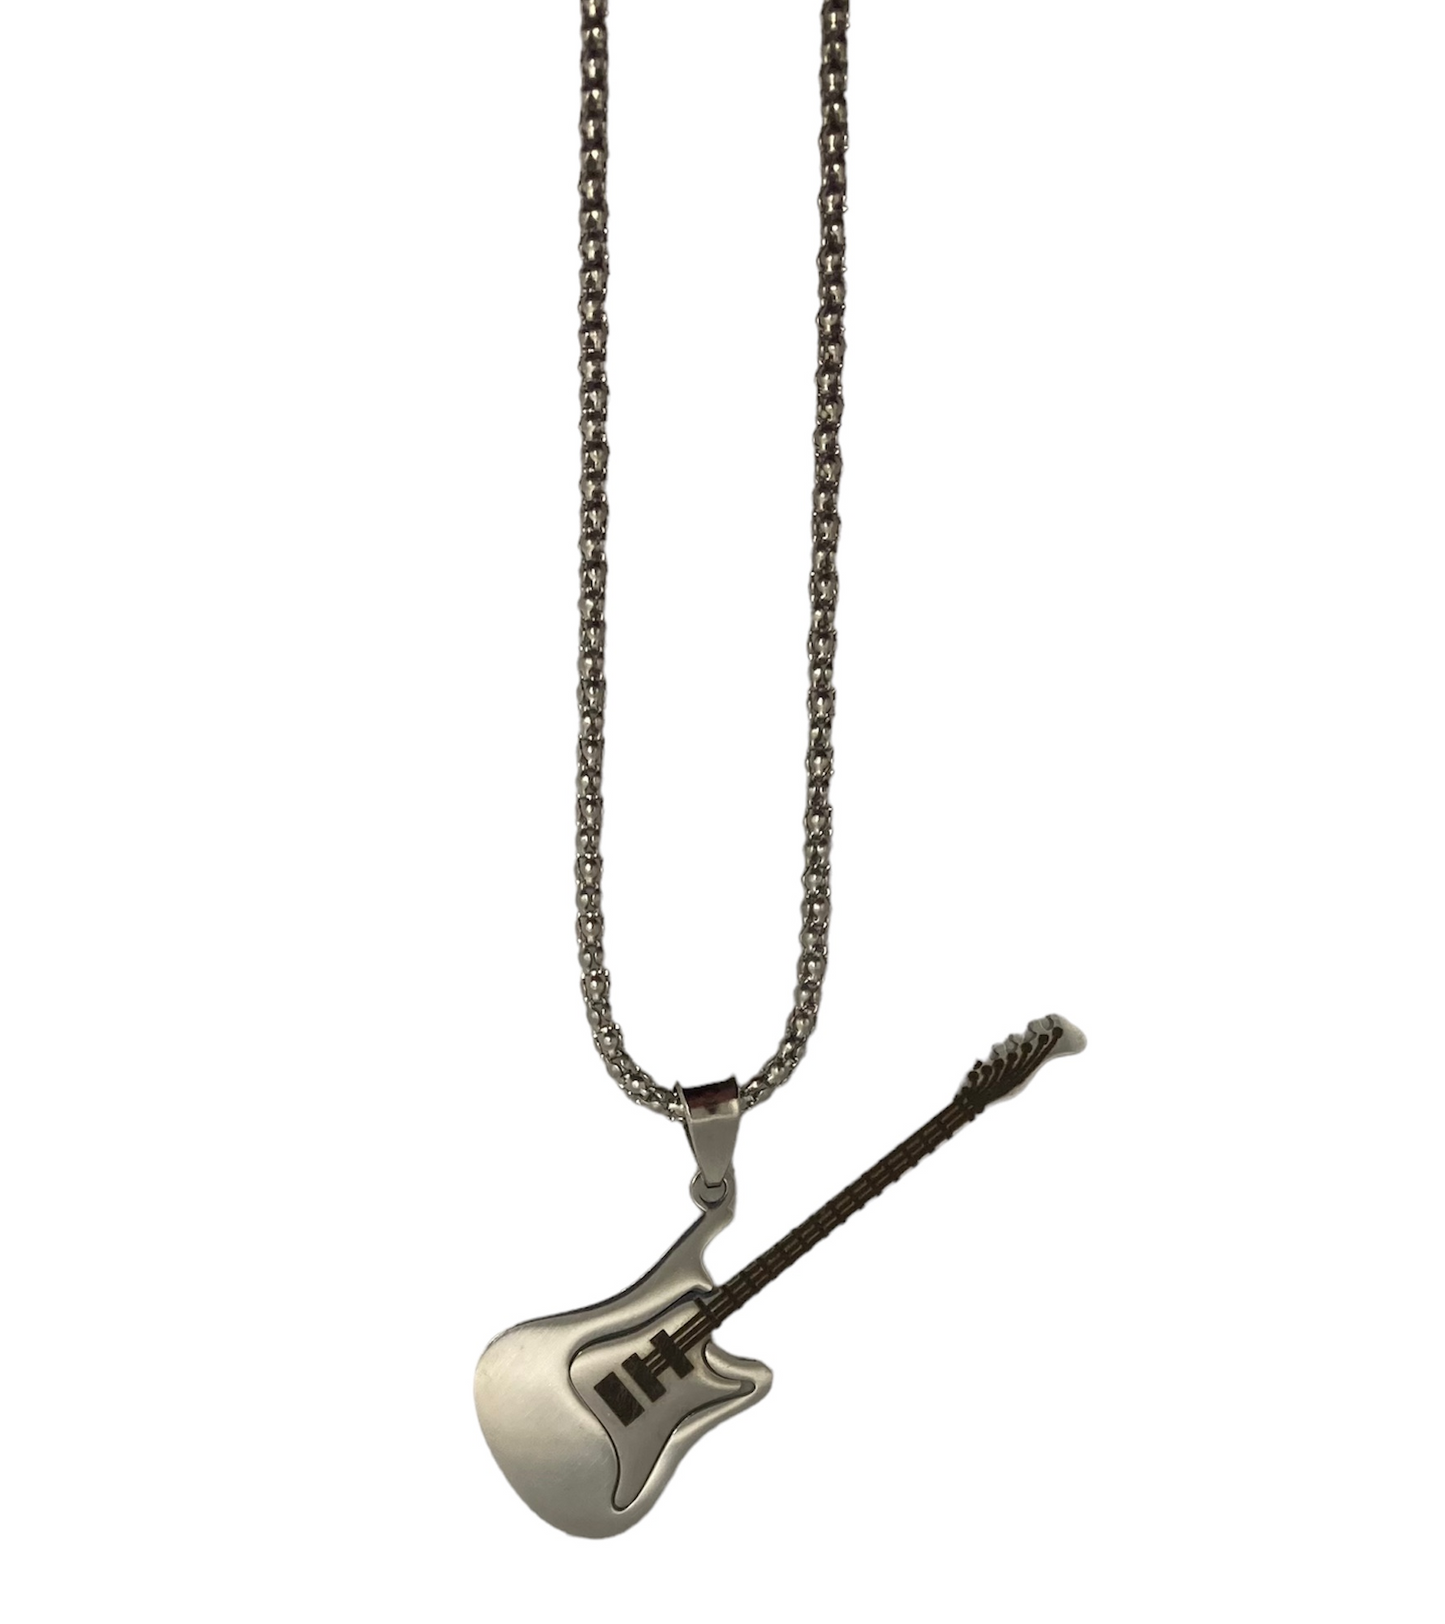 Guitar Necklace - Stainless Steel